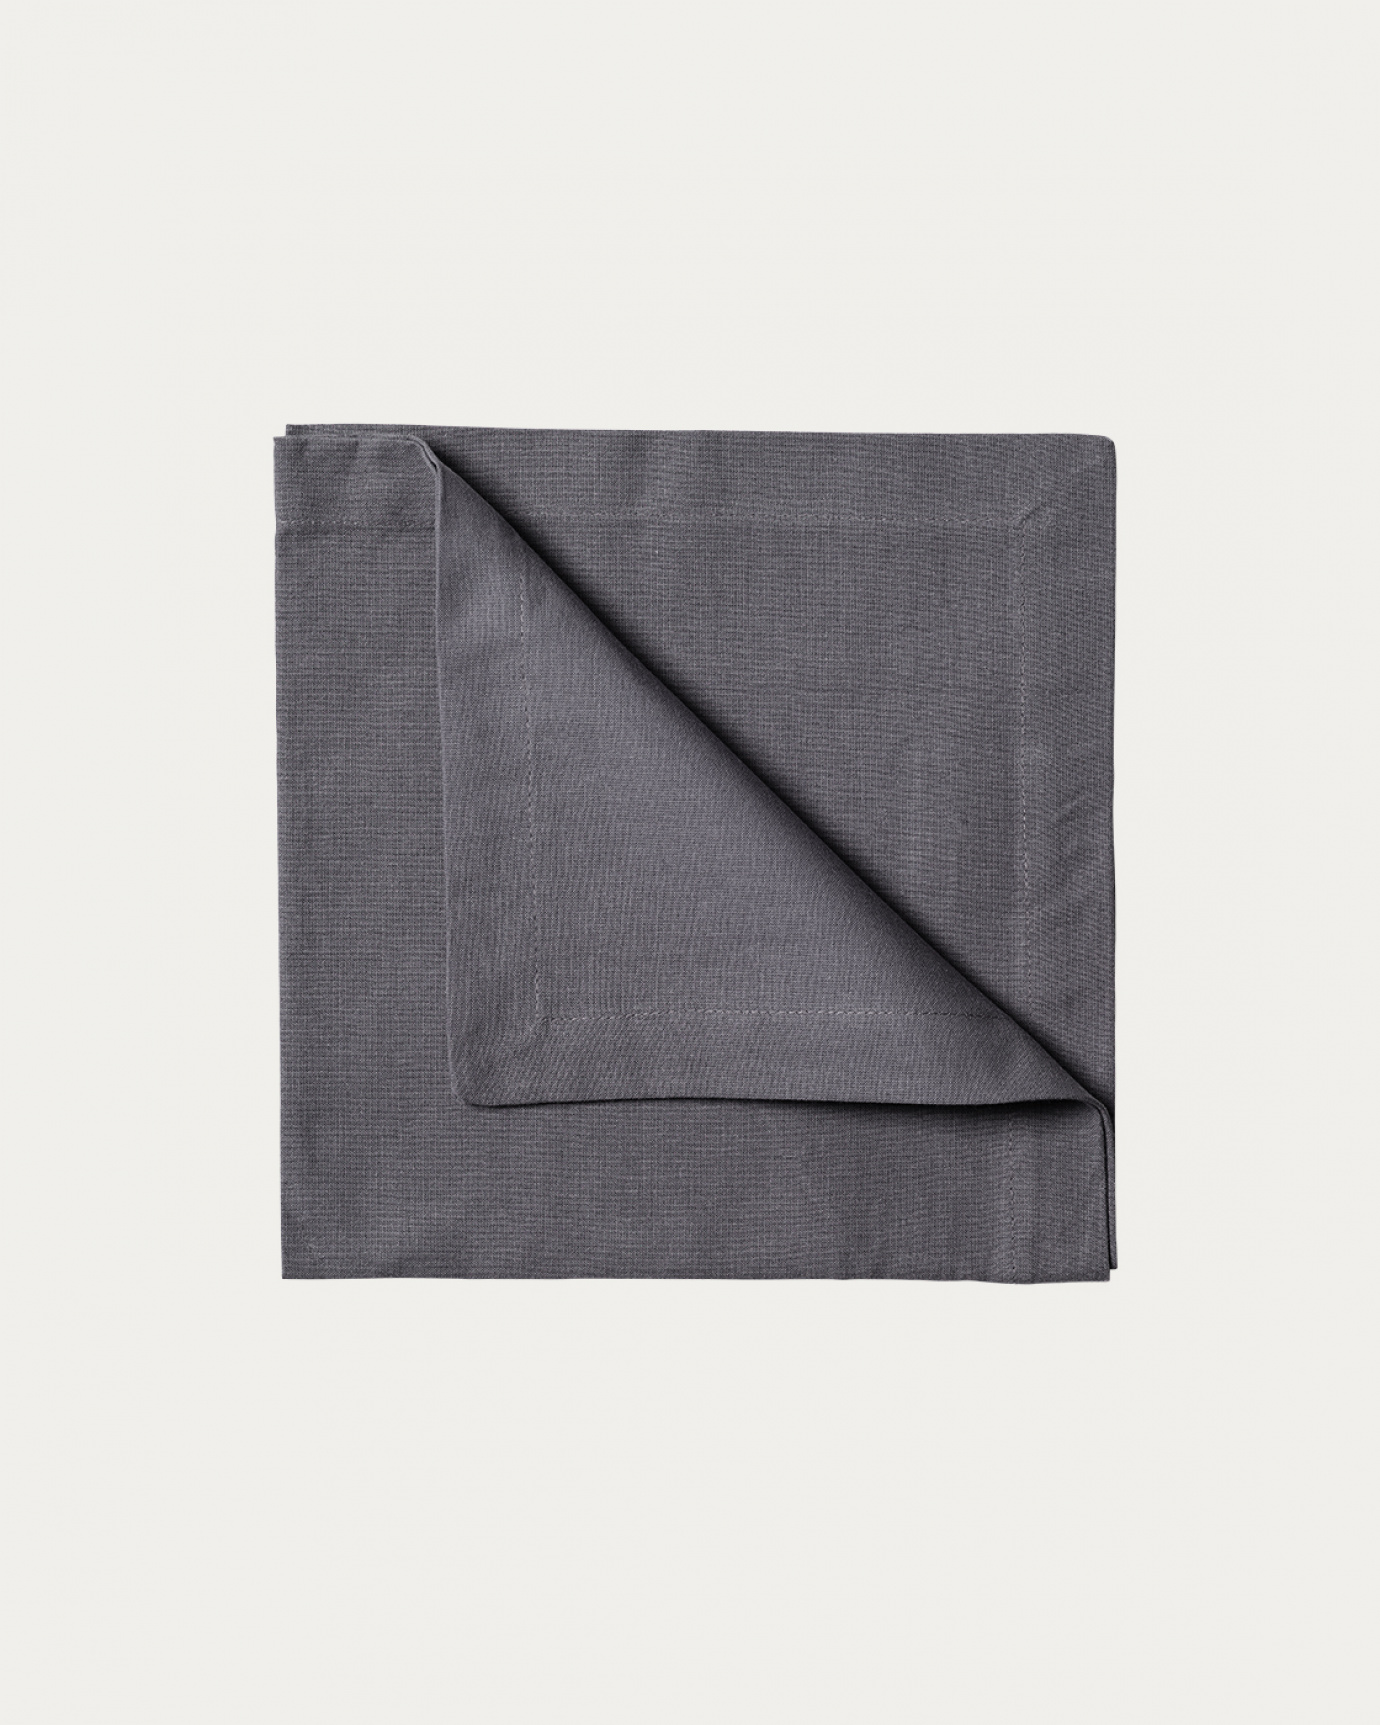 Product image granite grey ROBERT napkin made of soft cotton from LINUM DESIGN. Size 45x45 cm and sold in 4-pack.